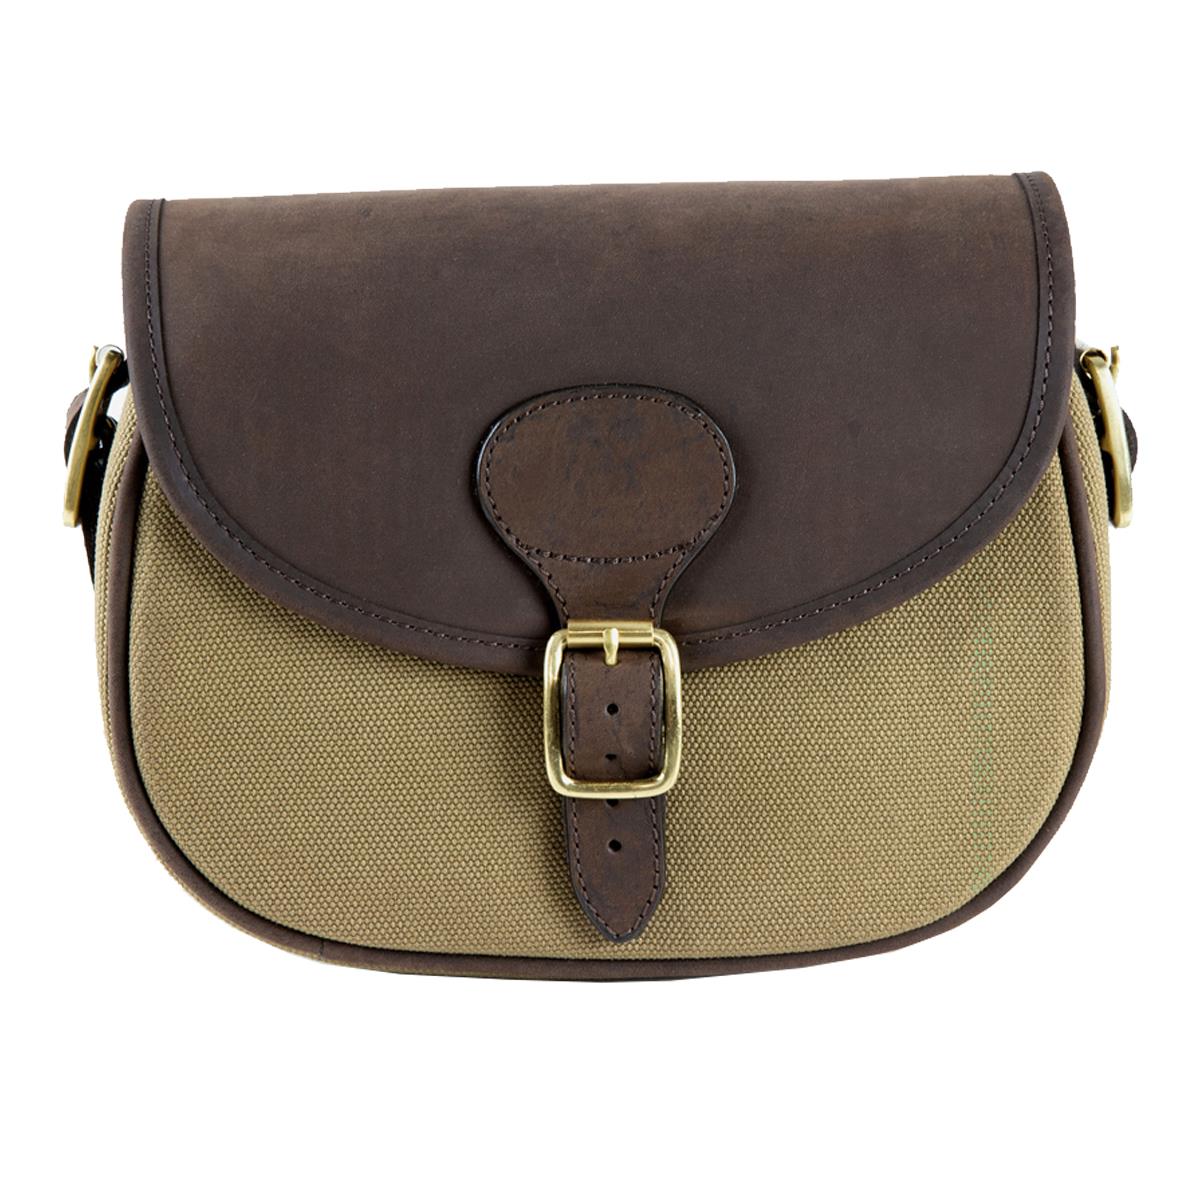 Is the strap of the Teales Huntsman Cartridge Bag canvas or leather, and what's the width?